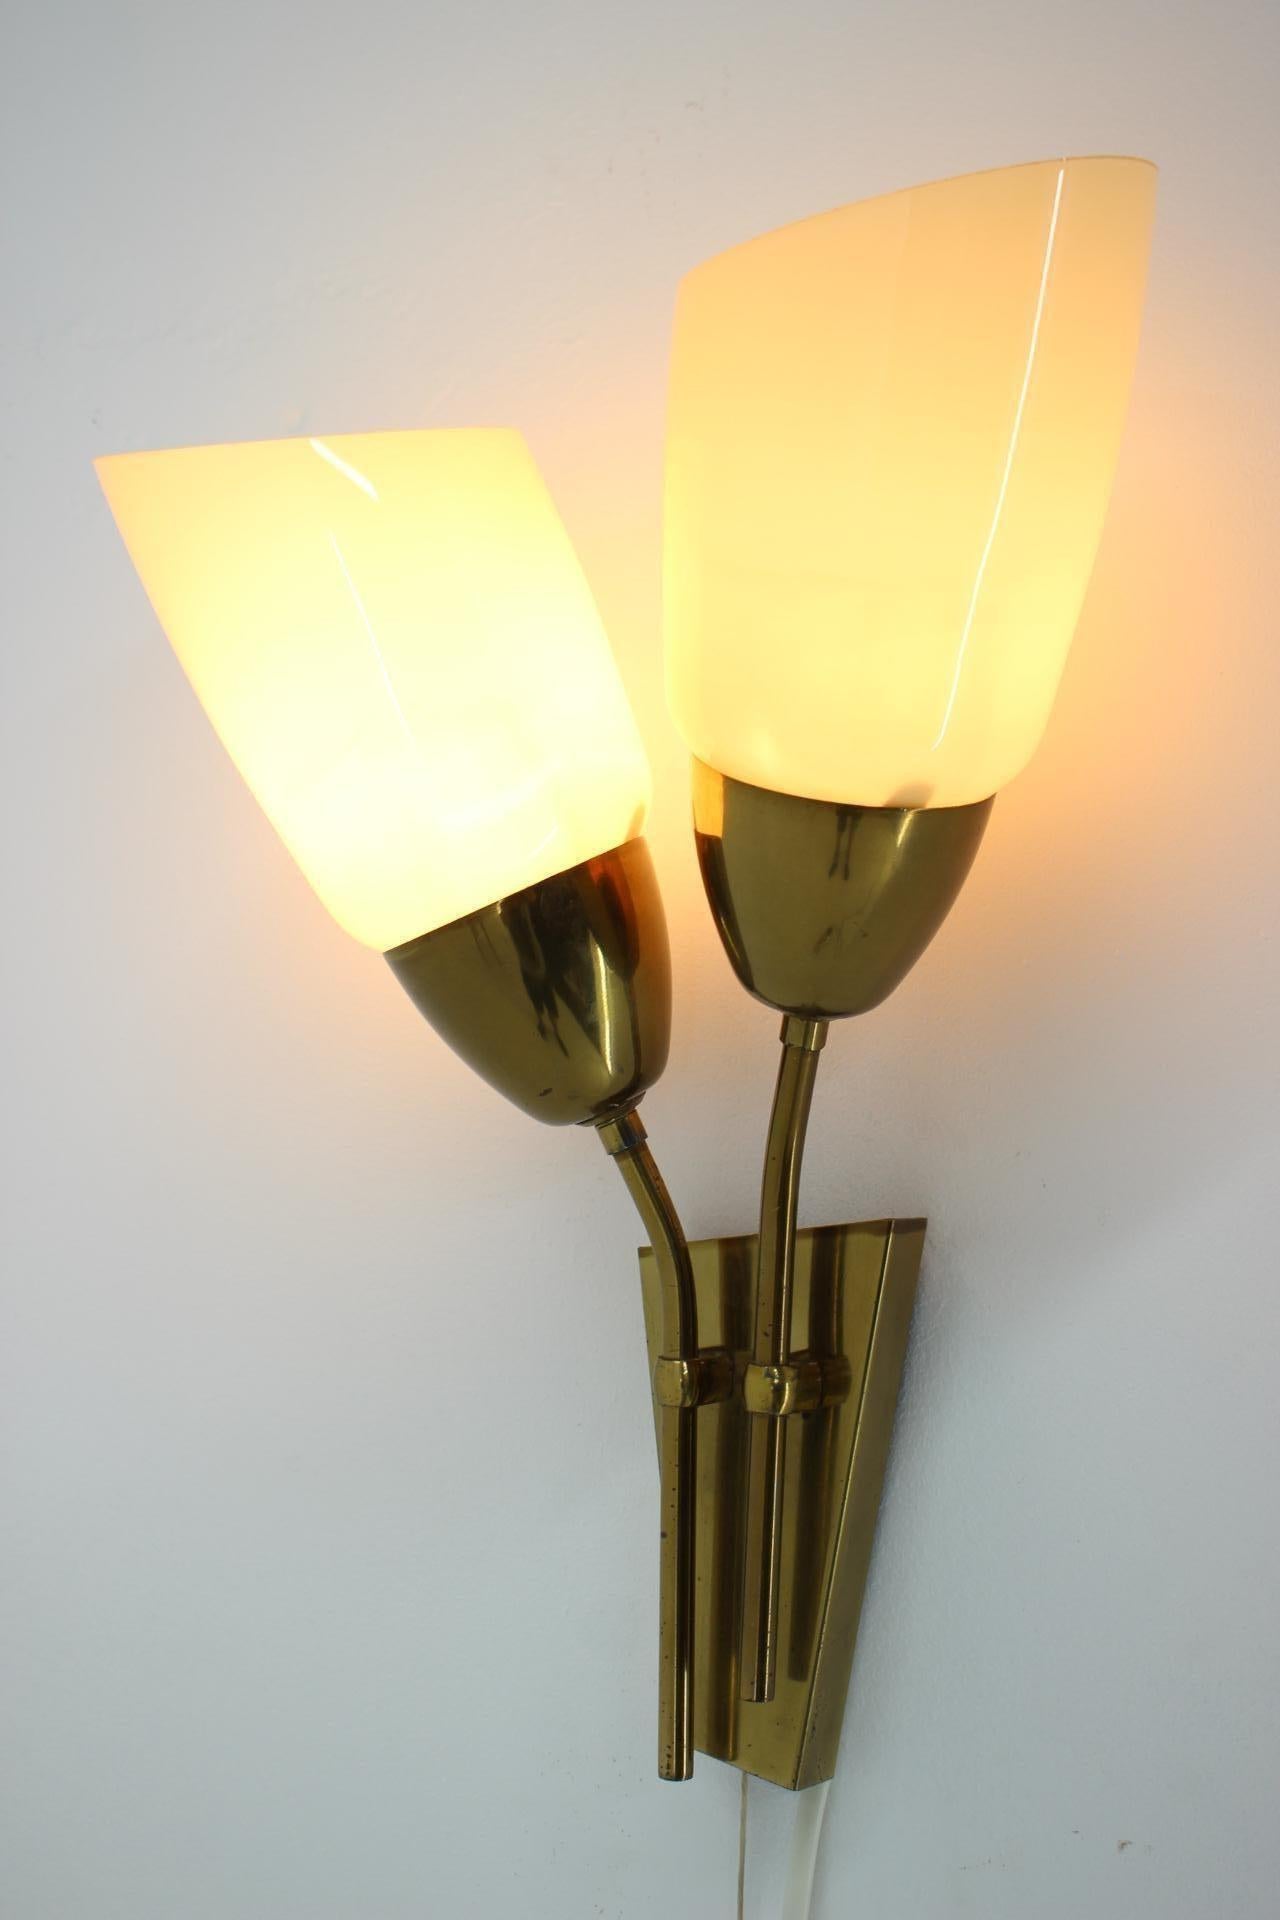 Mid-Century Modern Midcentury Brass Wall Lamp by Kamenicky Senov, 1970s, more pieces available For Sale